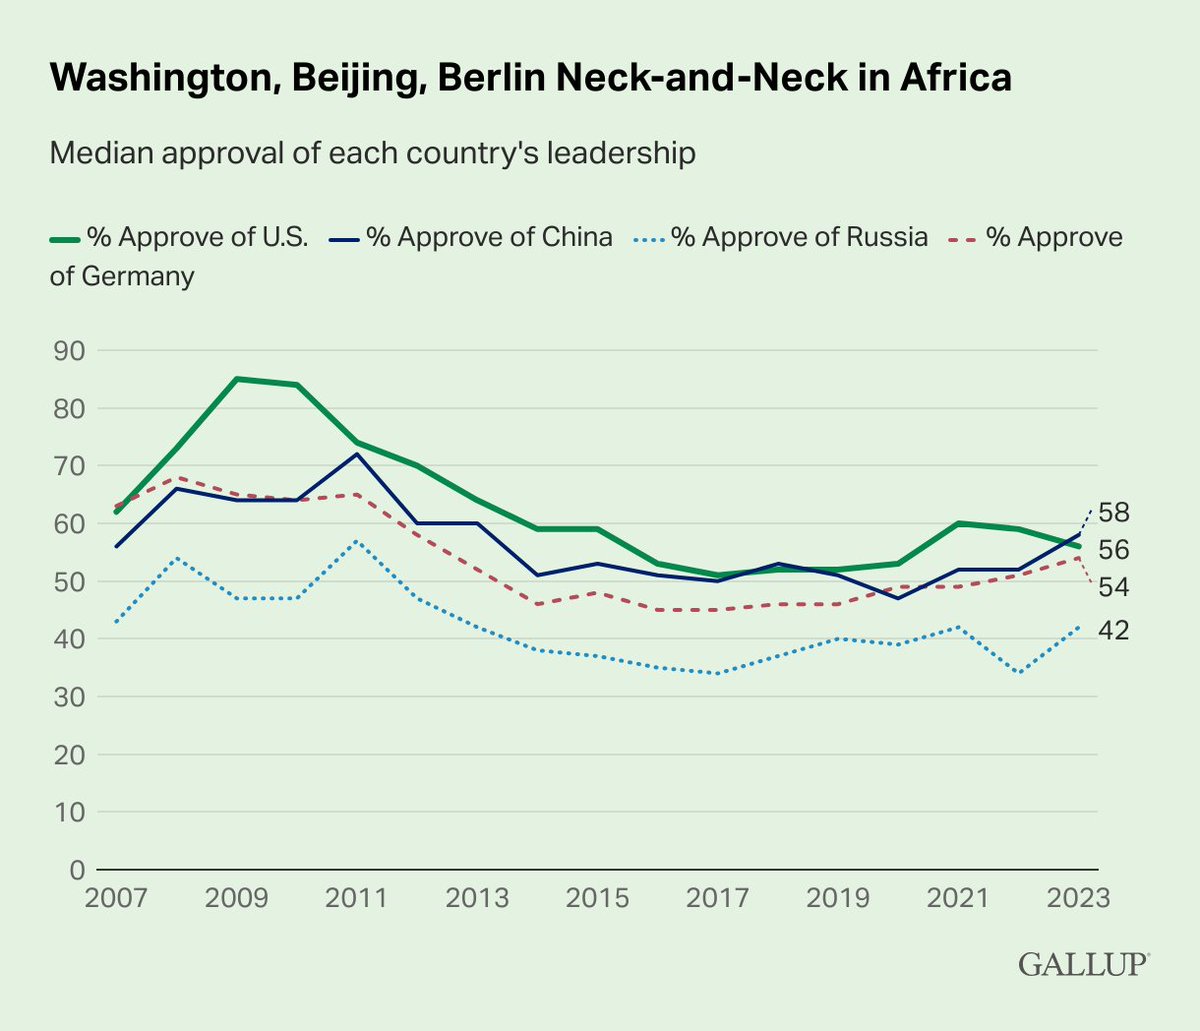 Findings from a new @Gallup survey suggest that the U.S. is losing its 'soft power edge in Africa'. Median approval ratings of Washington slipped from 59% in 2022 to 56% in 2023. China’s approval rose from 52% in 2022 to 58% in 2023. 🧵1/ news.gallup.com/poll/644222/lo…